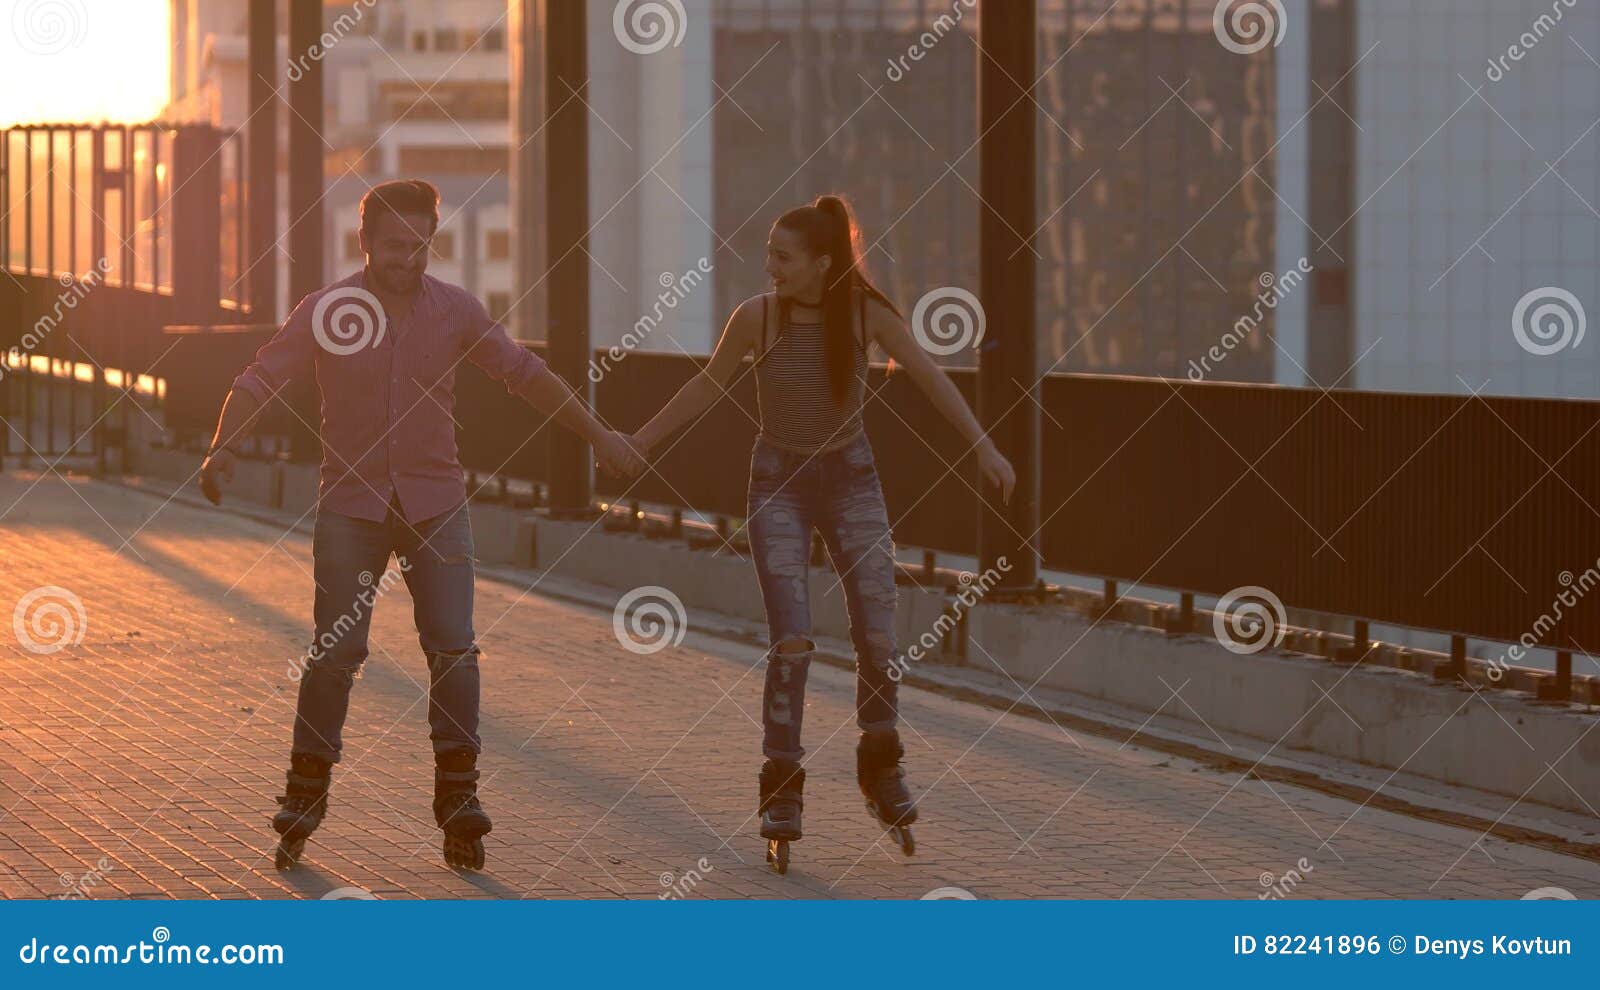 Female Rollerblading Stock Footage And Videos 614 Stock Videos